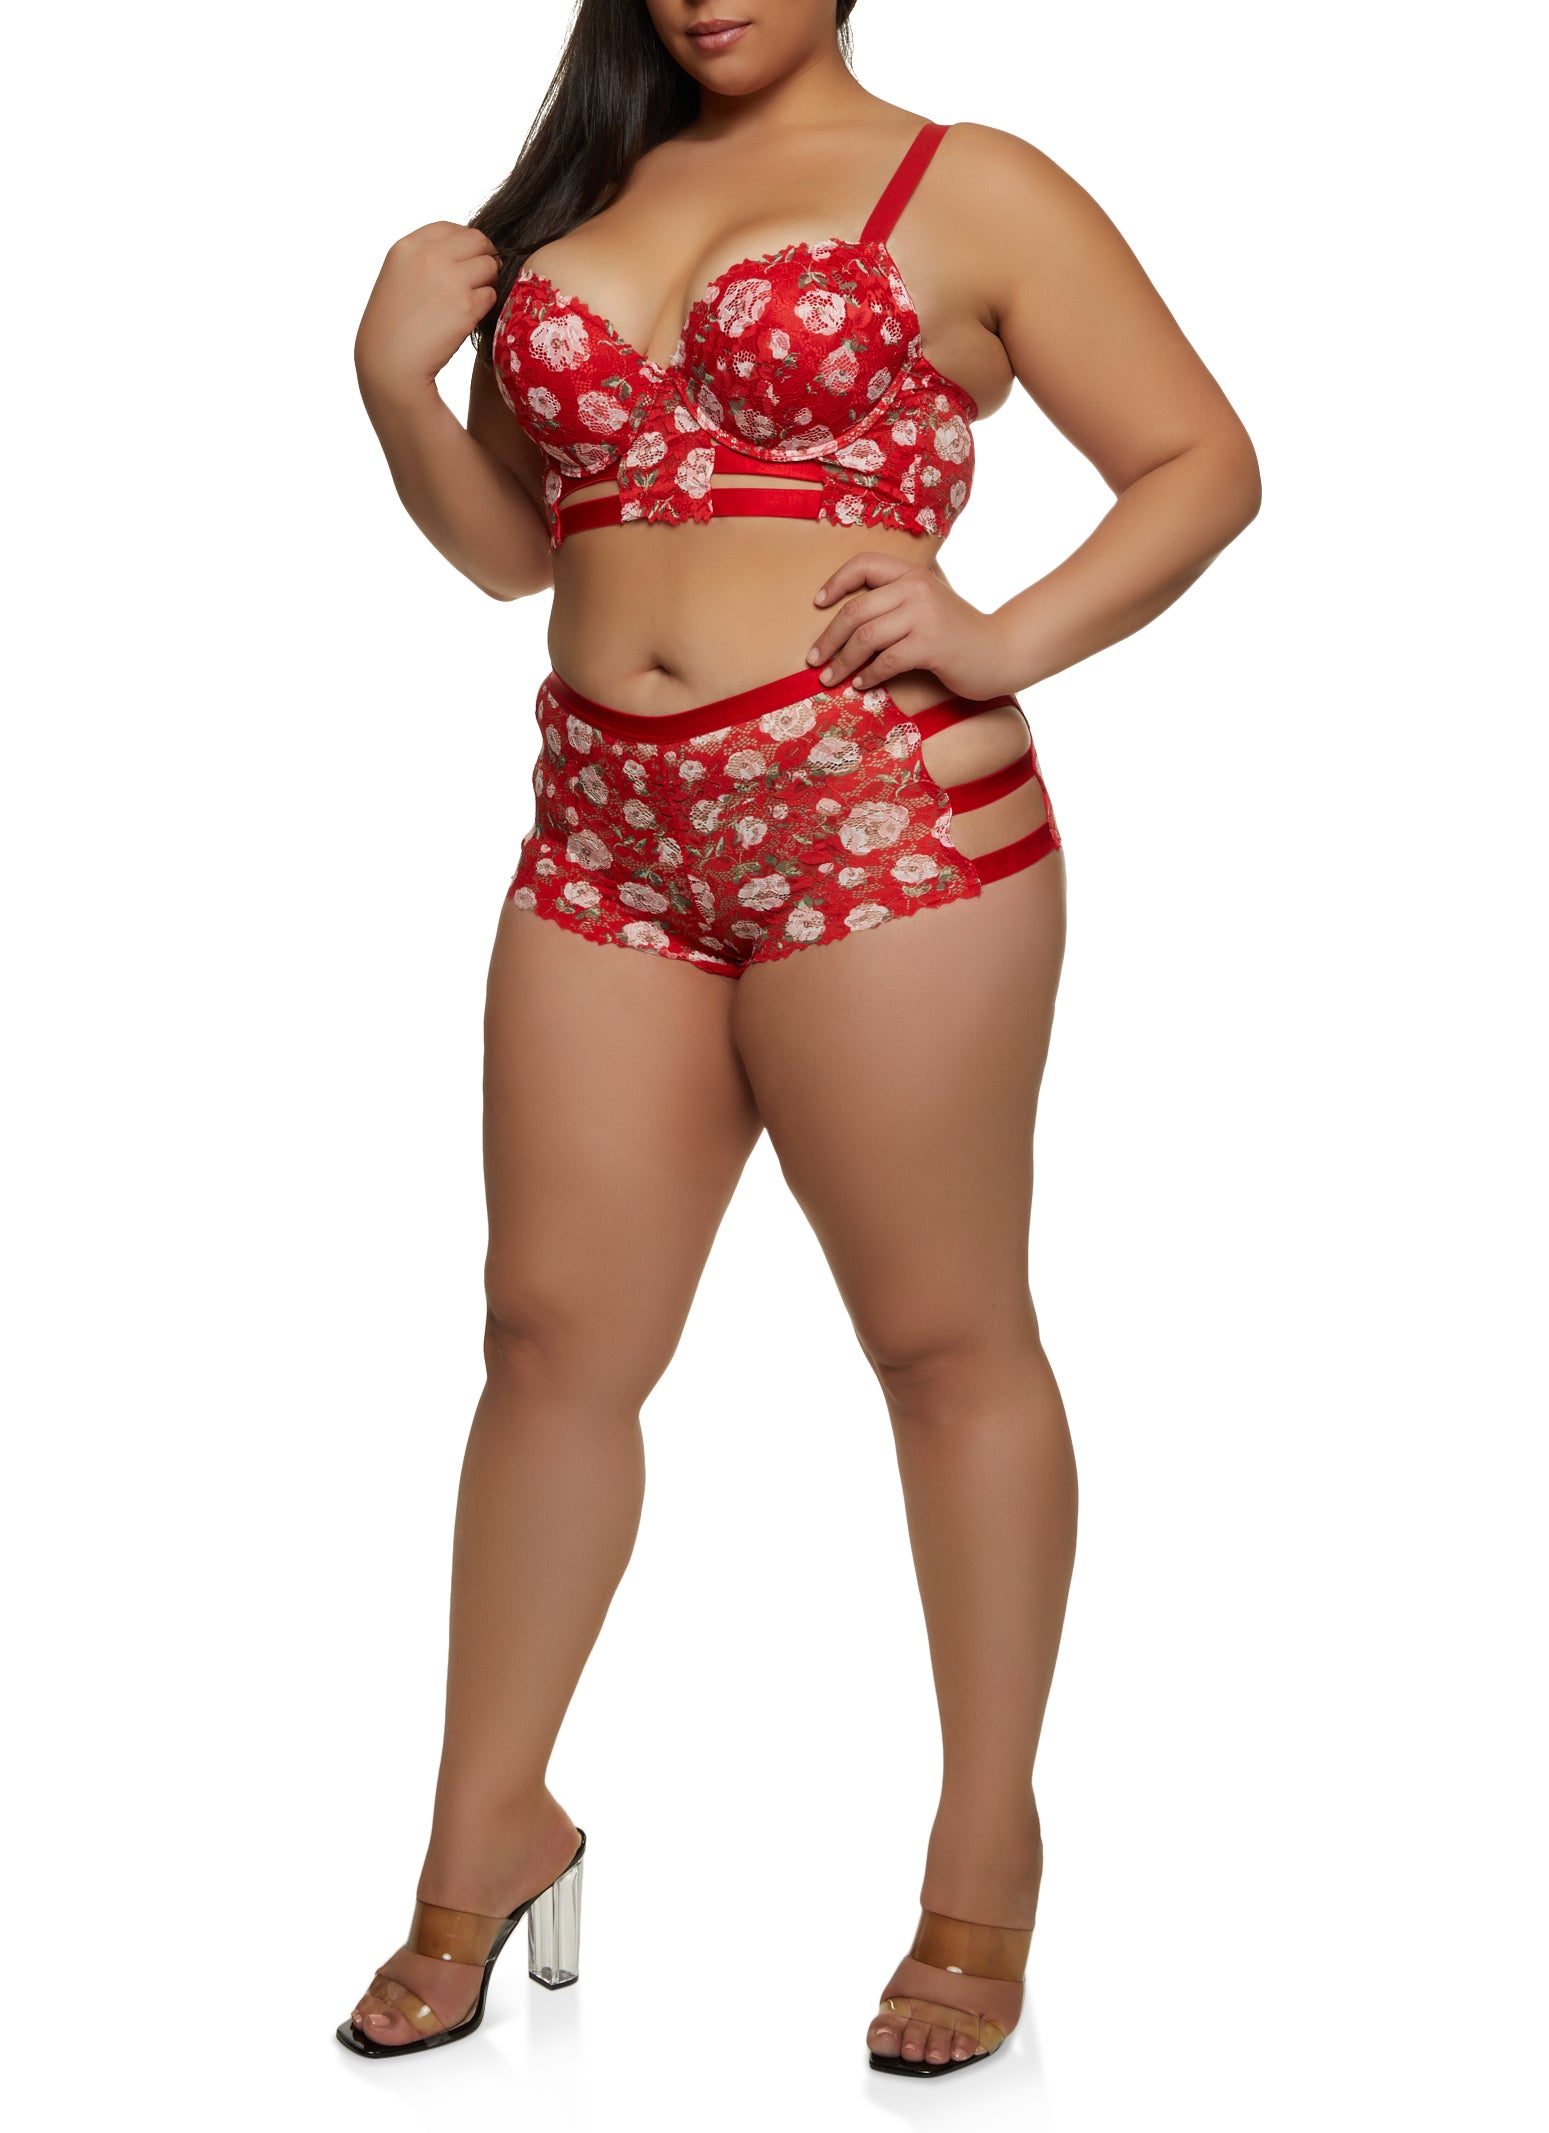 Rainbow Shops Womens Plus Size Floral Print Caged Longline Bra, Red, Size  38C